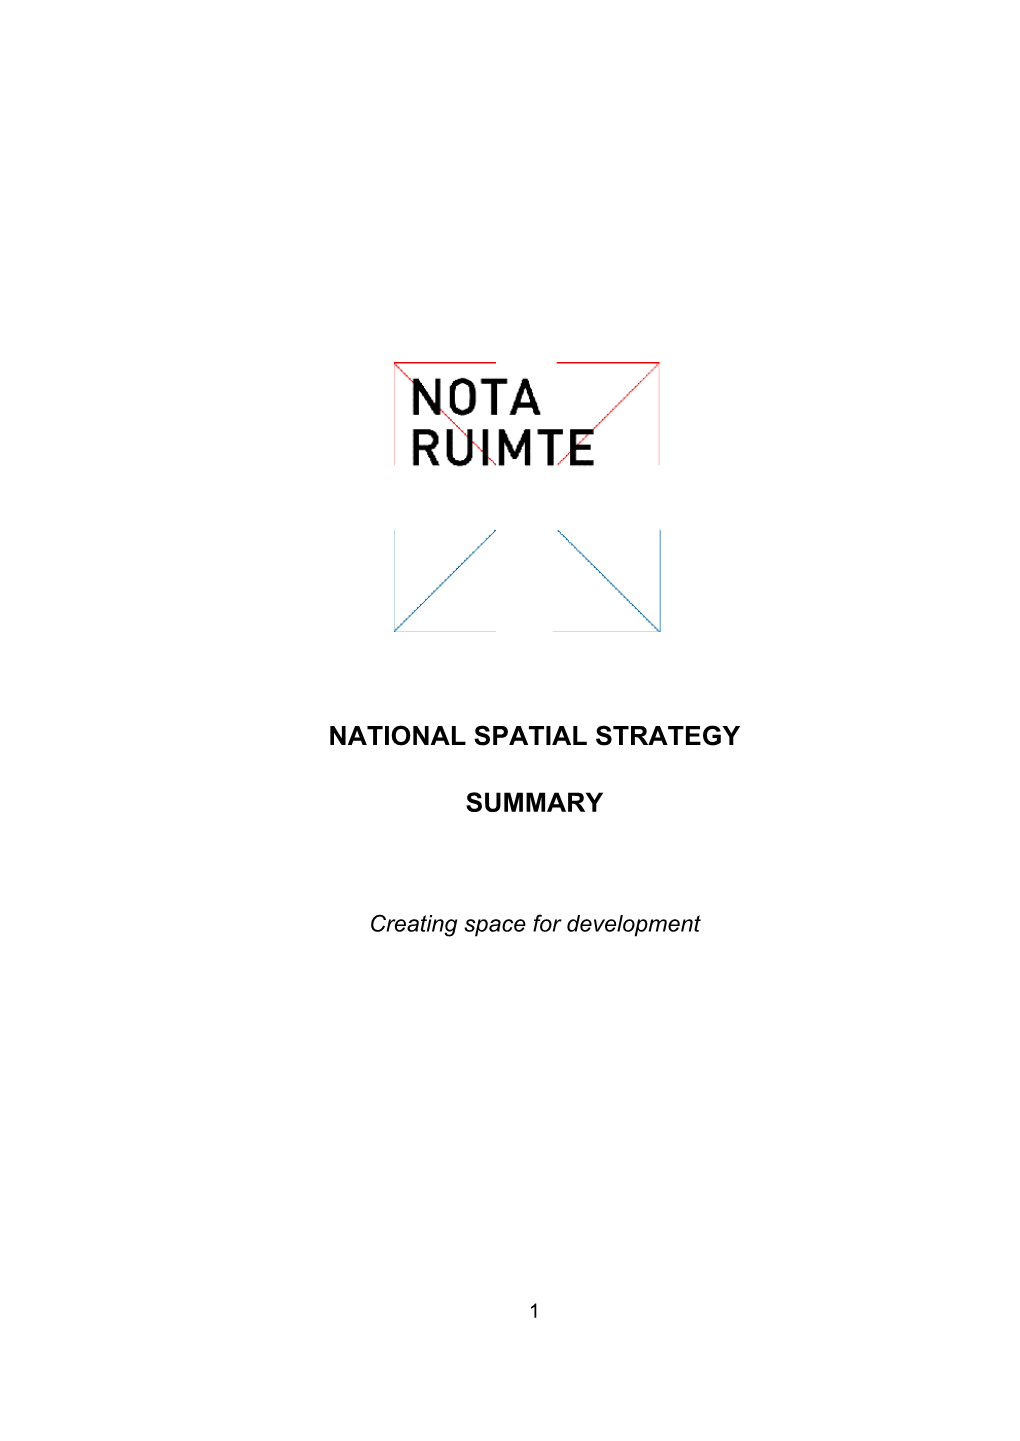 National Spatial Strategy Summary